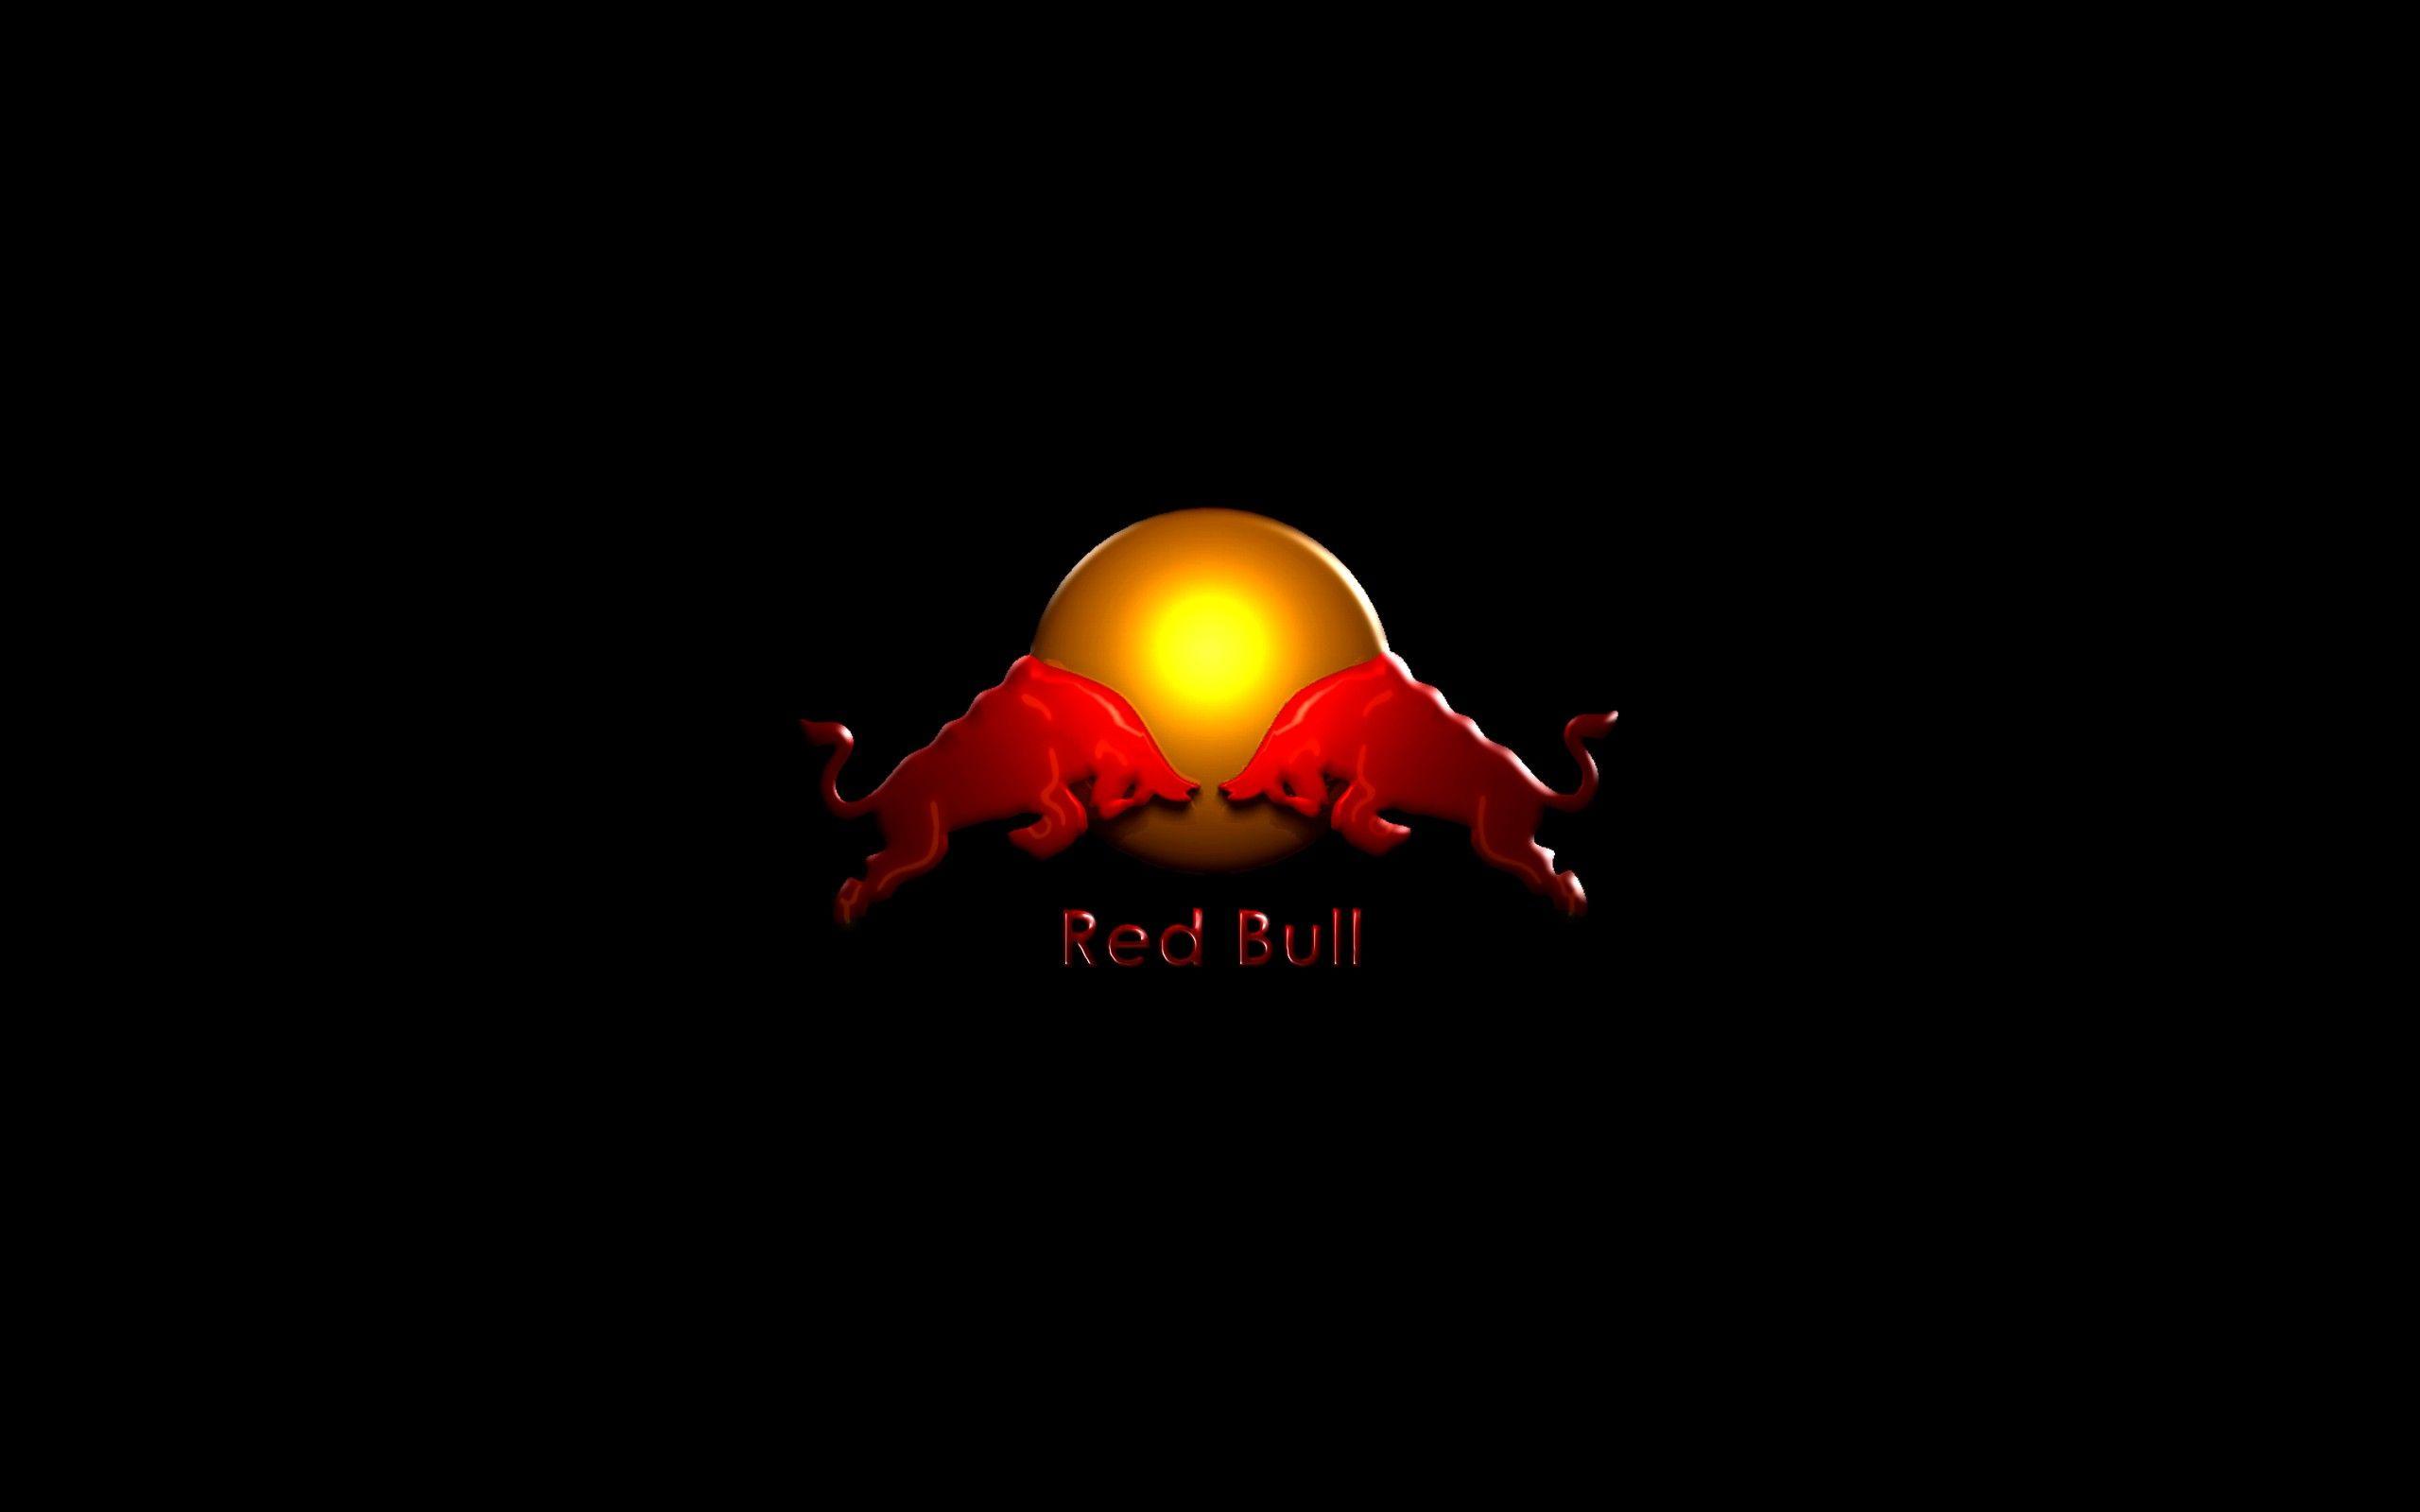 Red Bull Wallpaper Background 17890 2560x1600 px